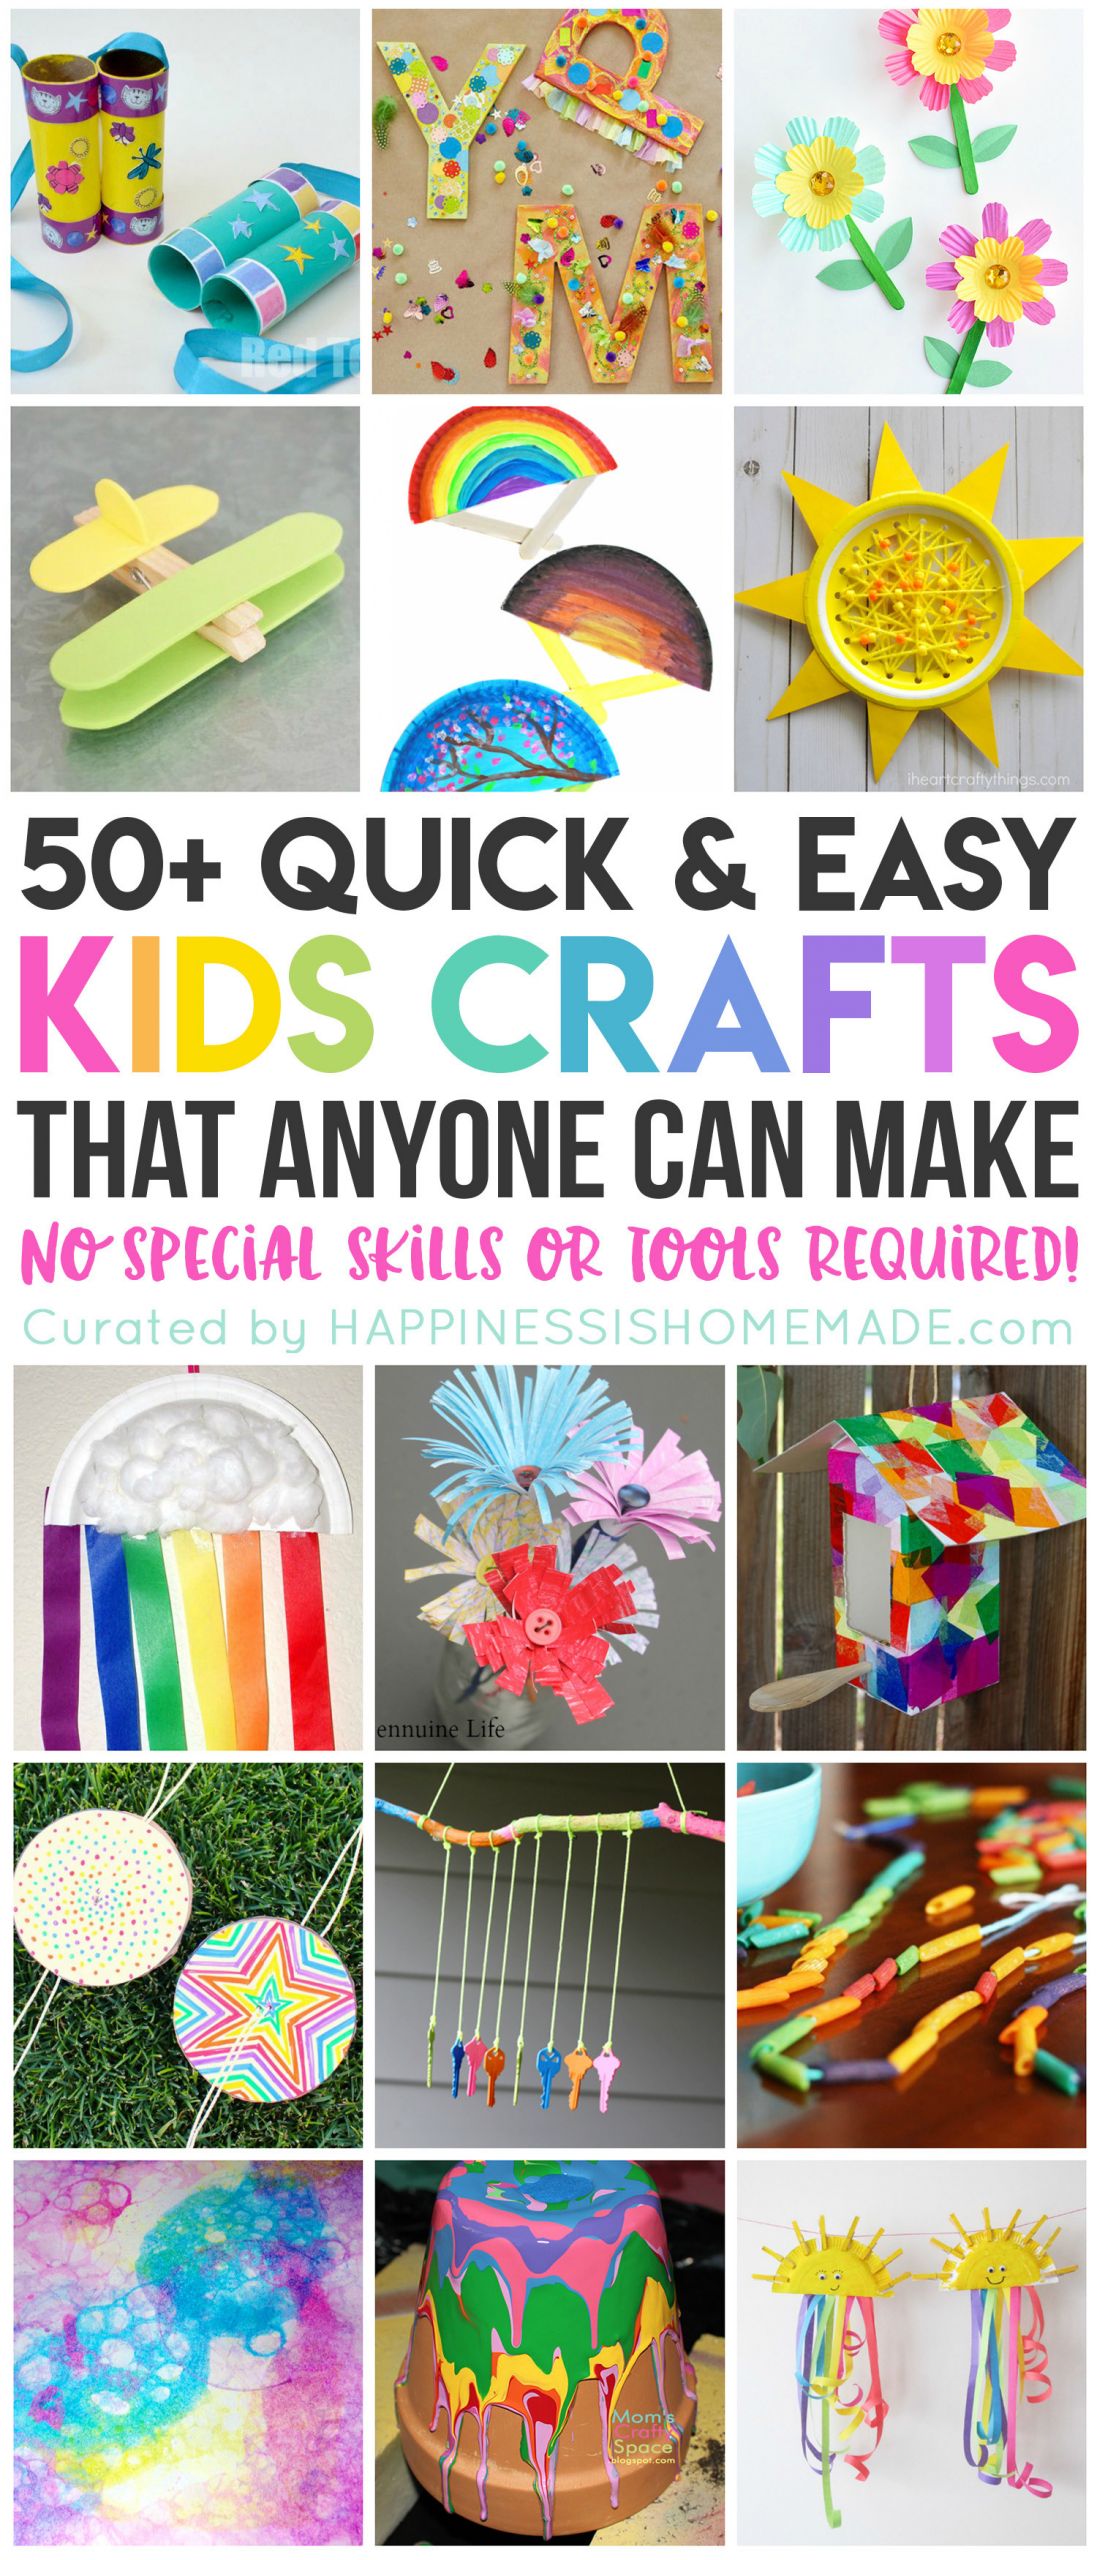 Easy Arts And Crafts For Toddlers
 50 Quick & Easy Kids Crafts that ANYONE Can Make